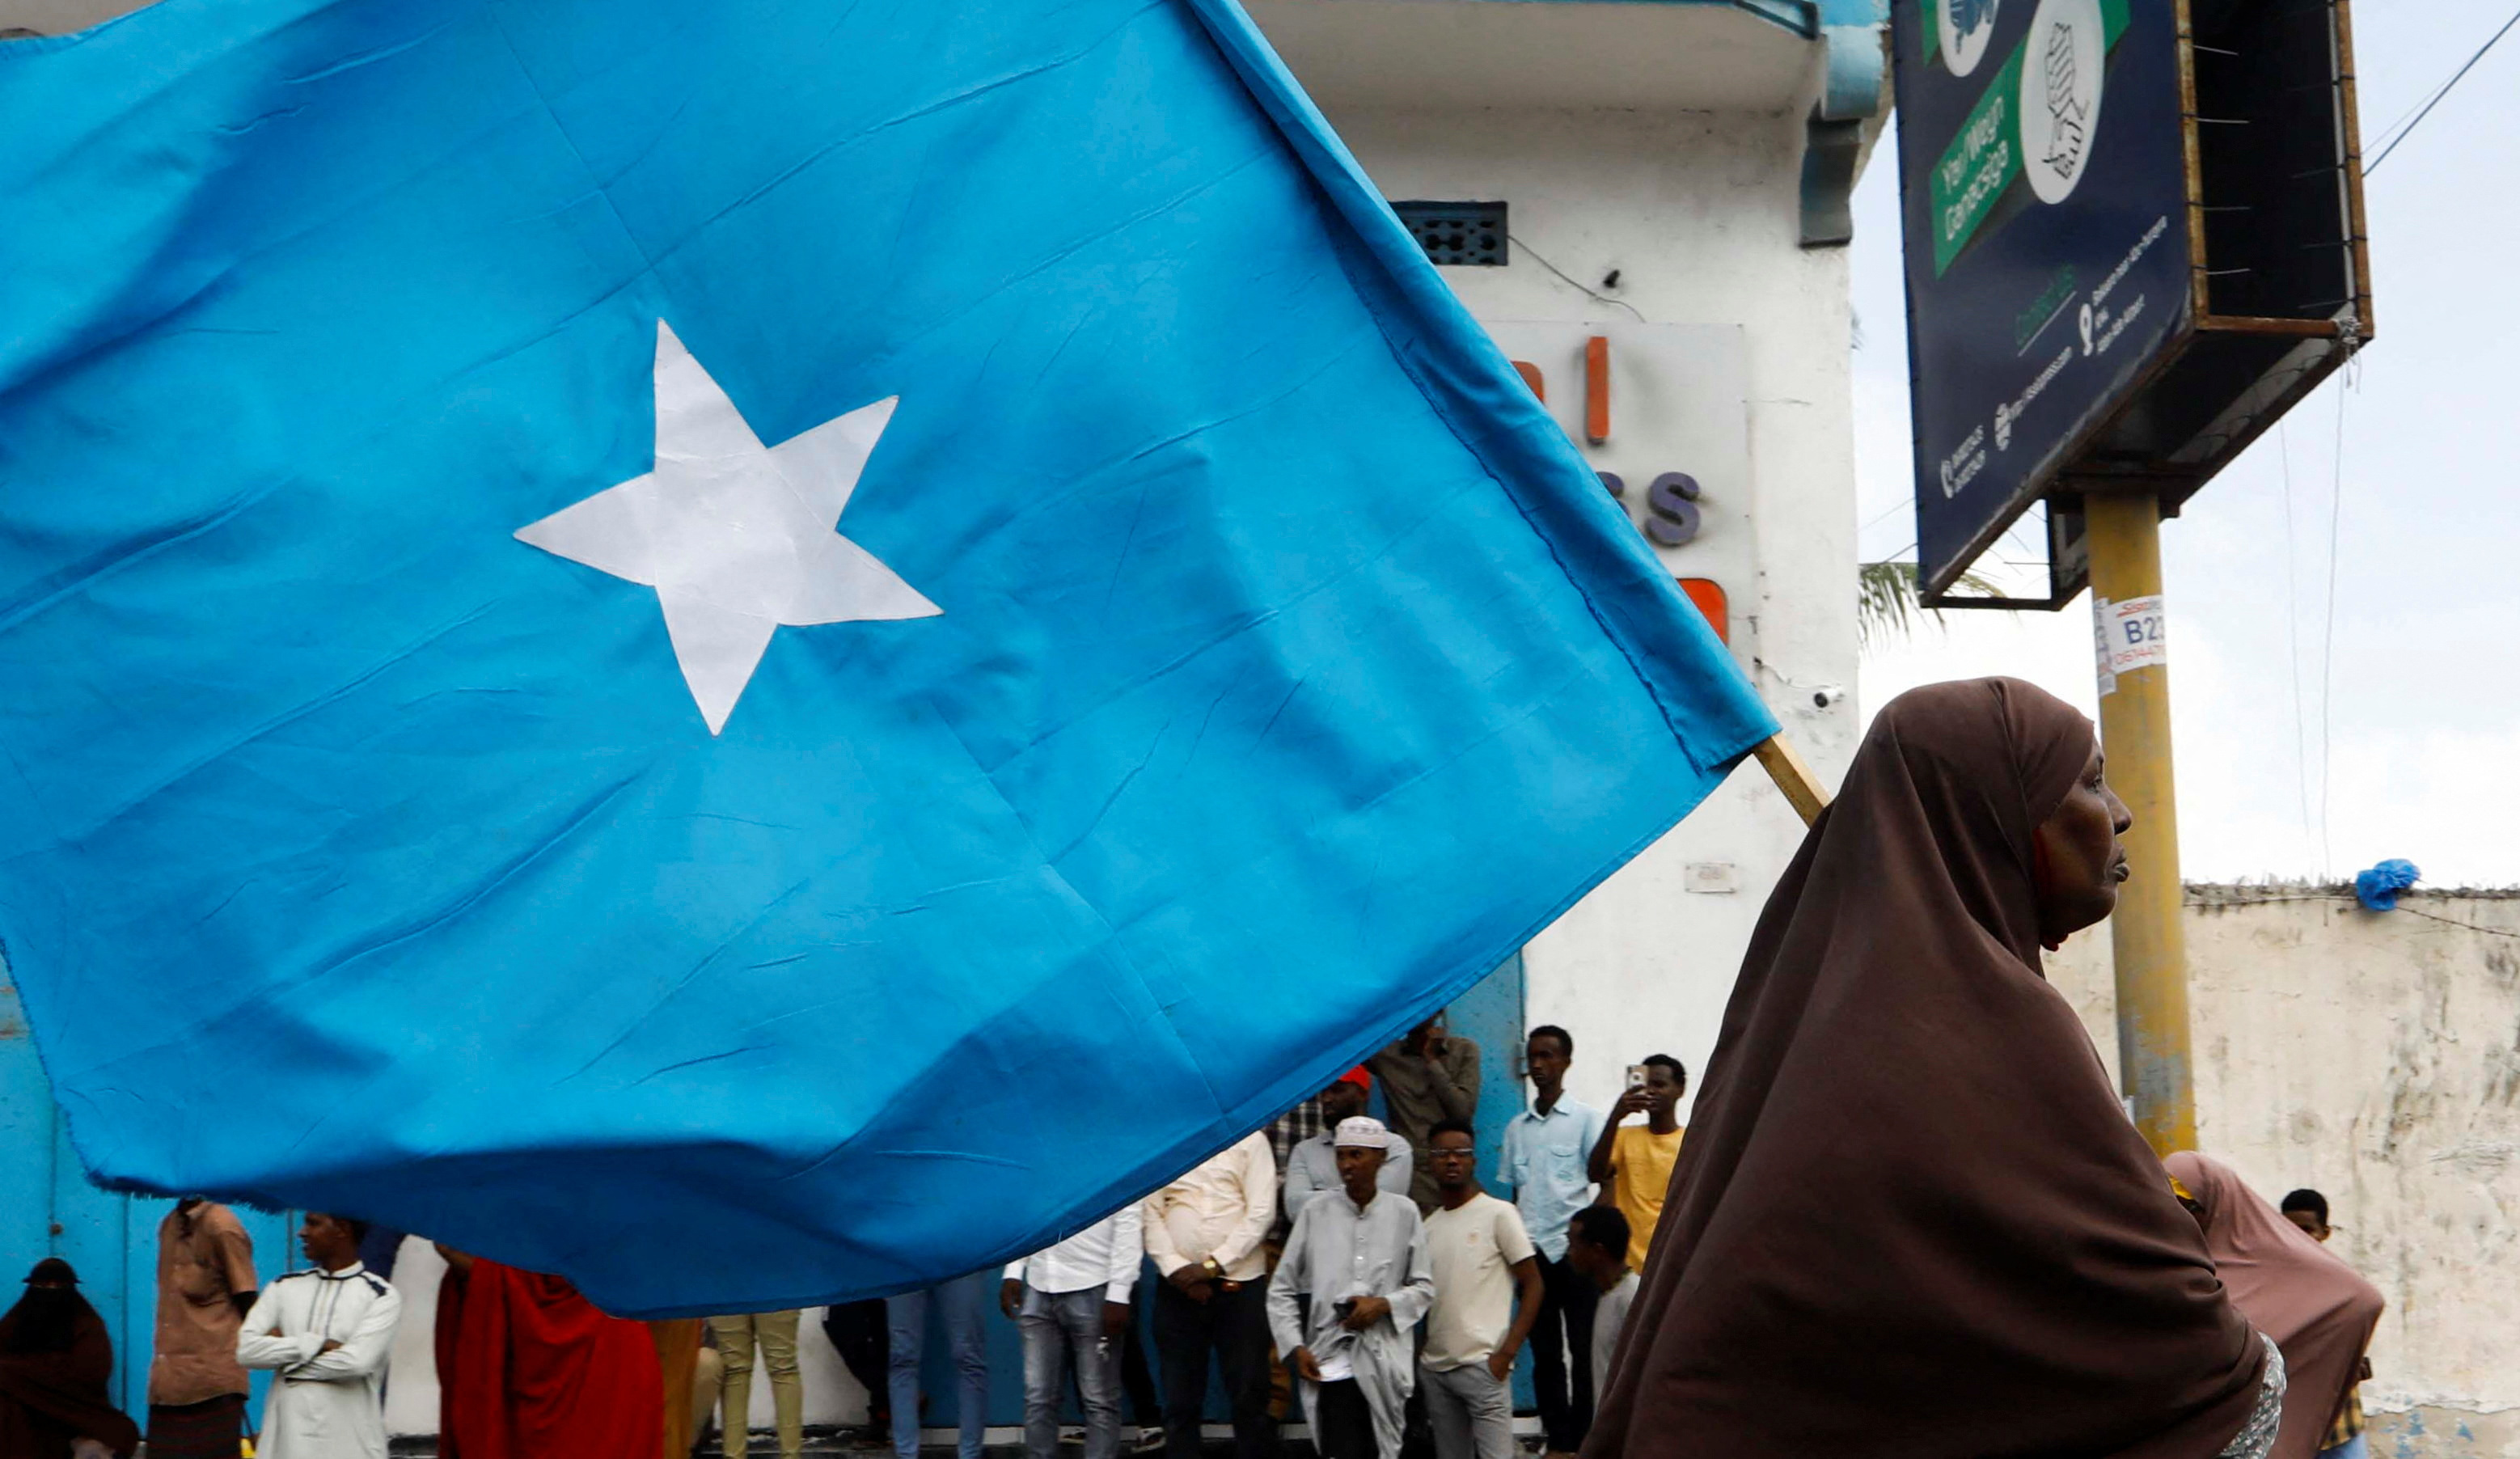 A Somali woman carries their flag during a march against the Ethiopia-Somaliland port deal along KM4 street in Mogadishu